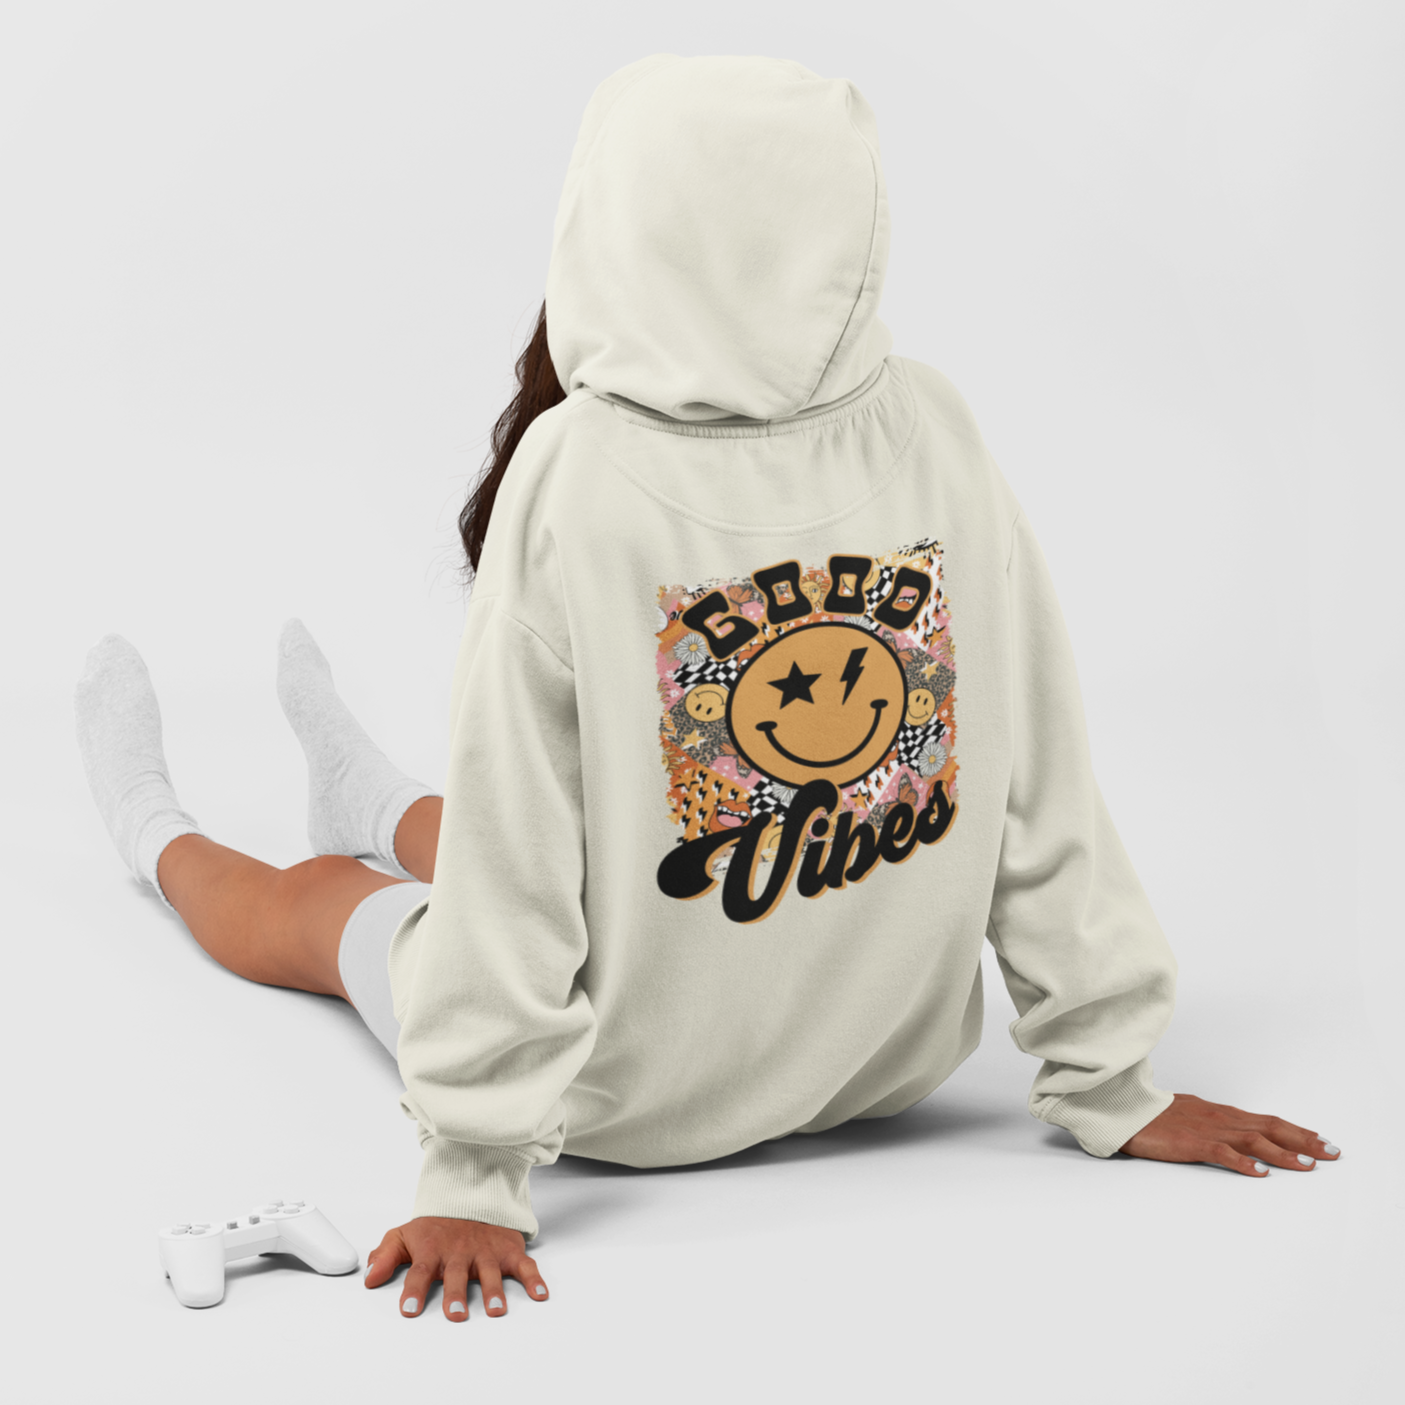 Good Vibes- Full Color Heat Transfer